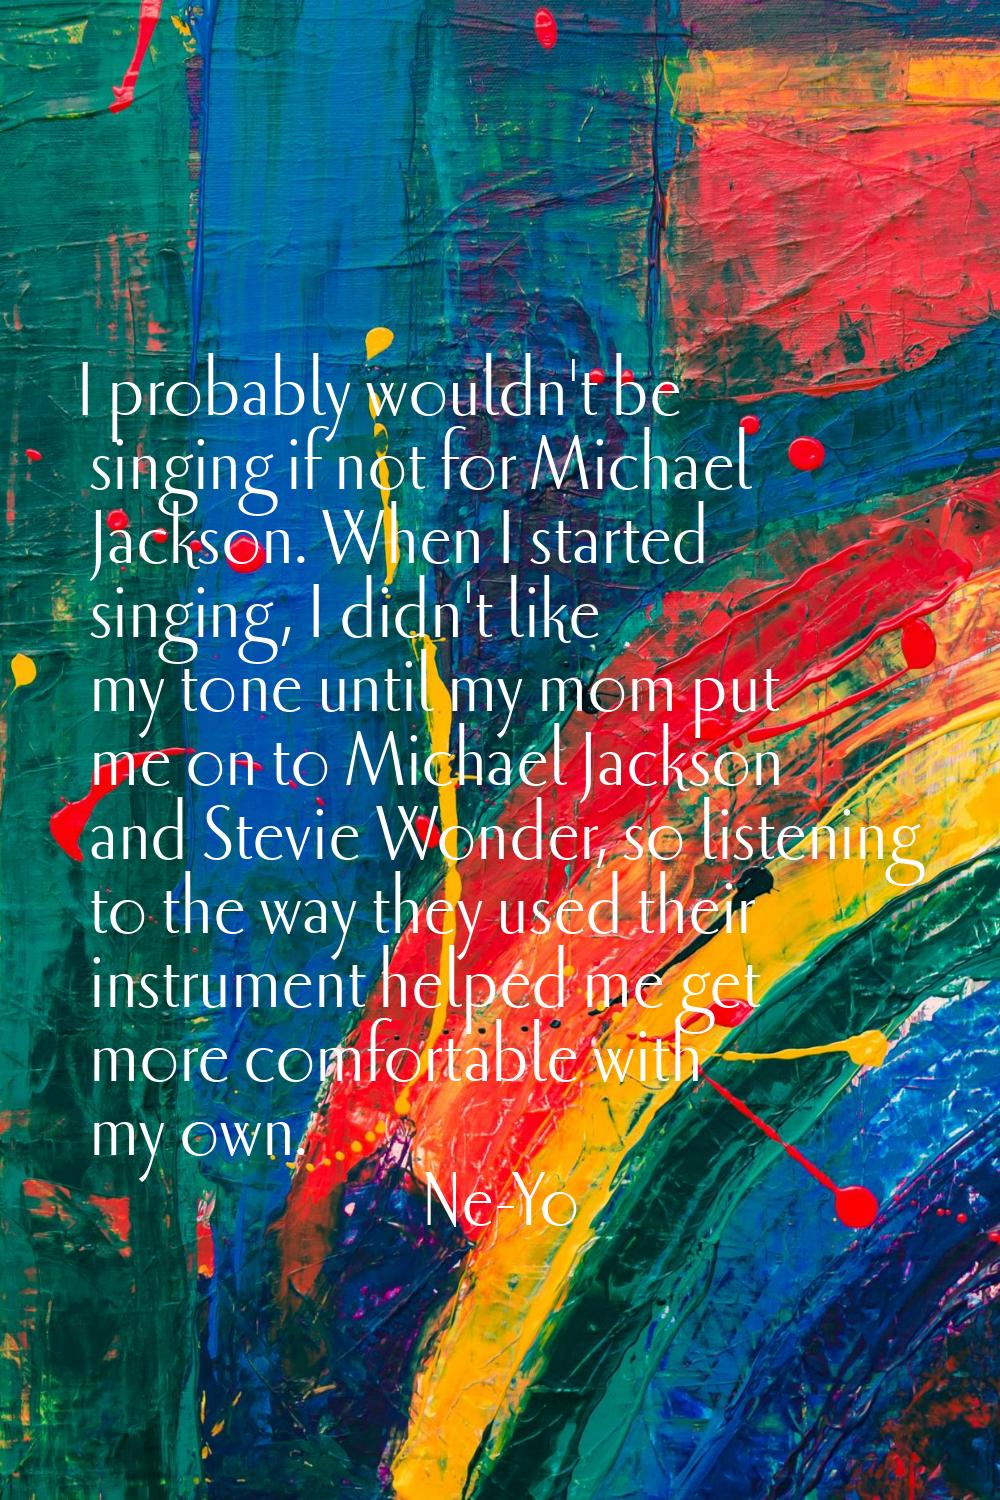 I probably wouldn't be singing if not for Michael Jackson. When I started singing, I didn't like my